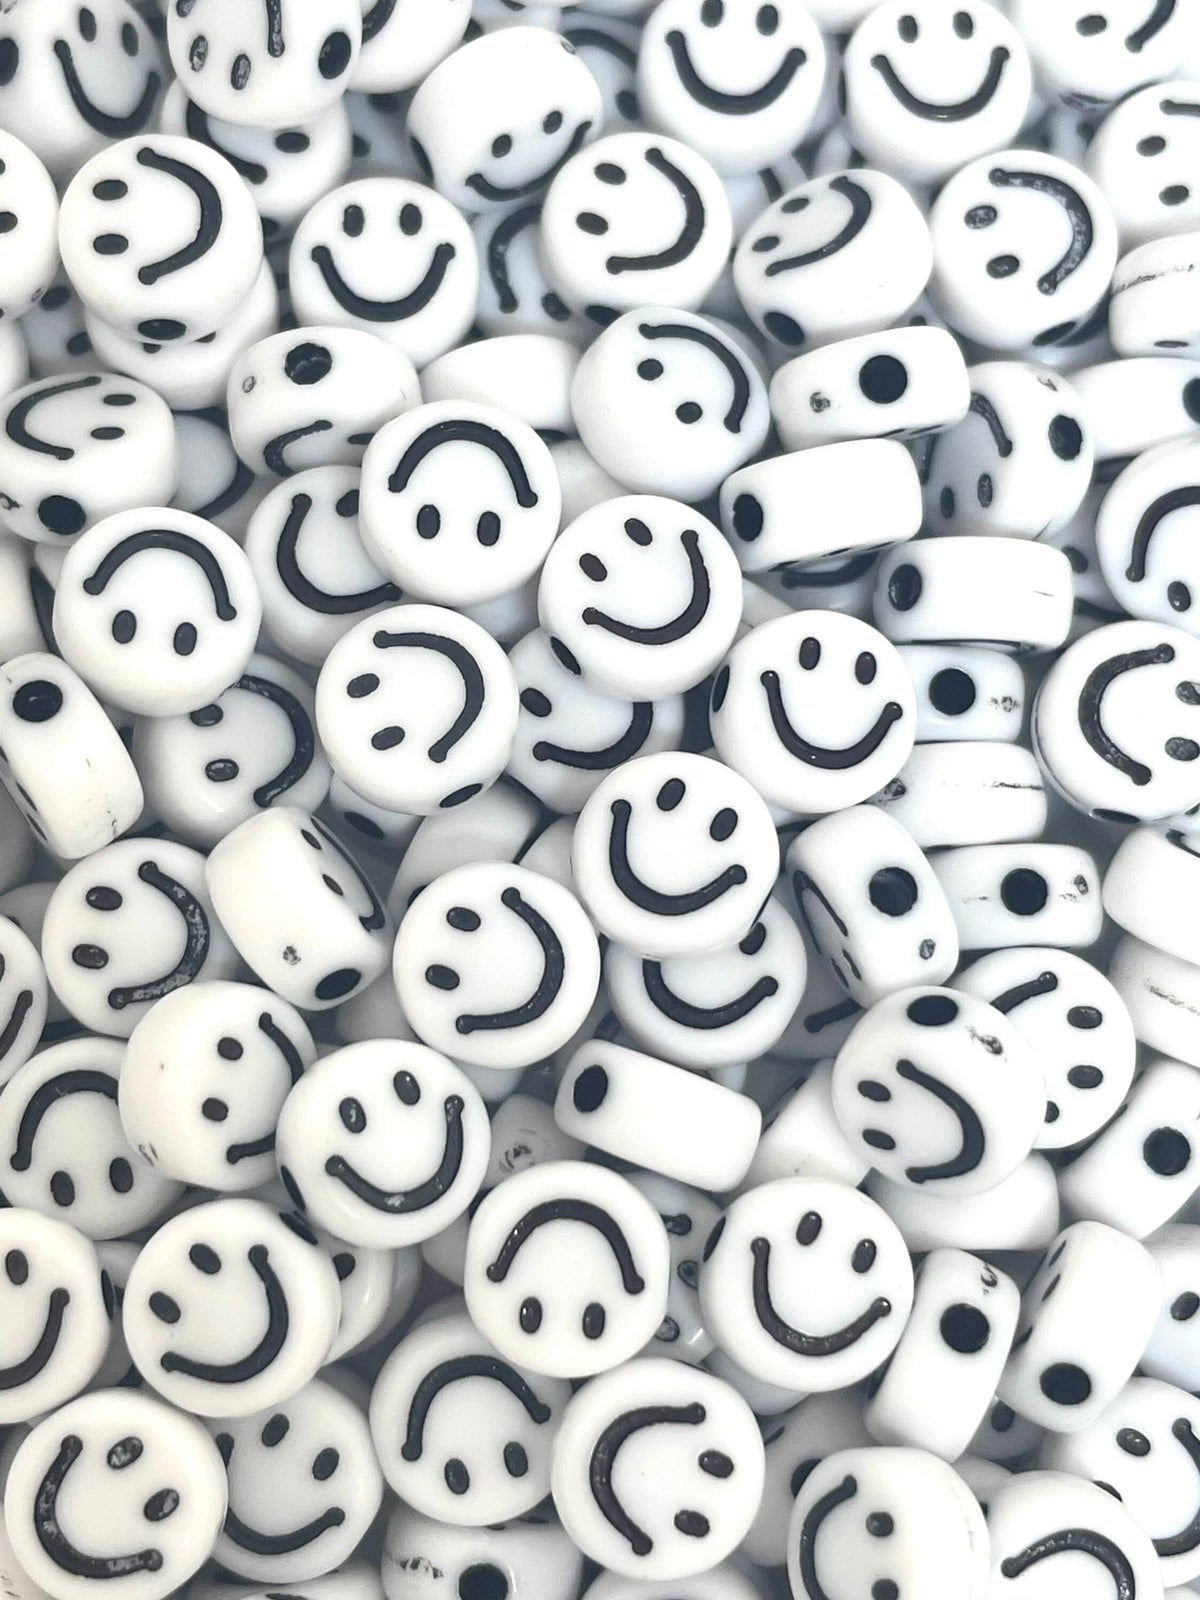 SMOL Yellow Smiley Face Beads, Charms for Bracelet, Necklace